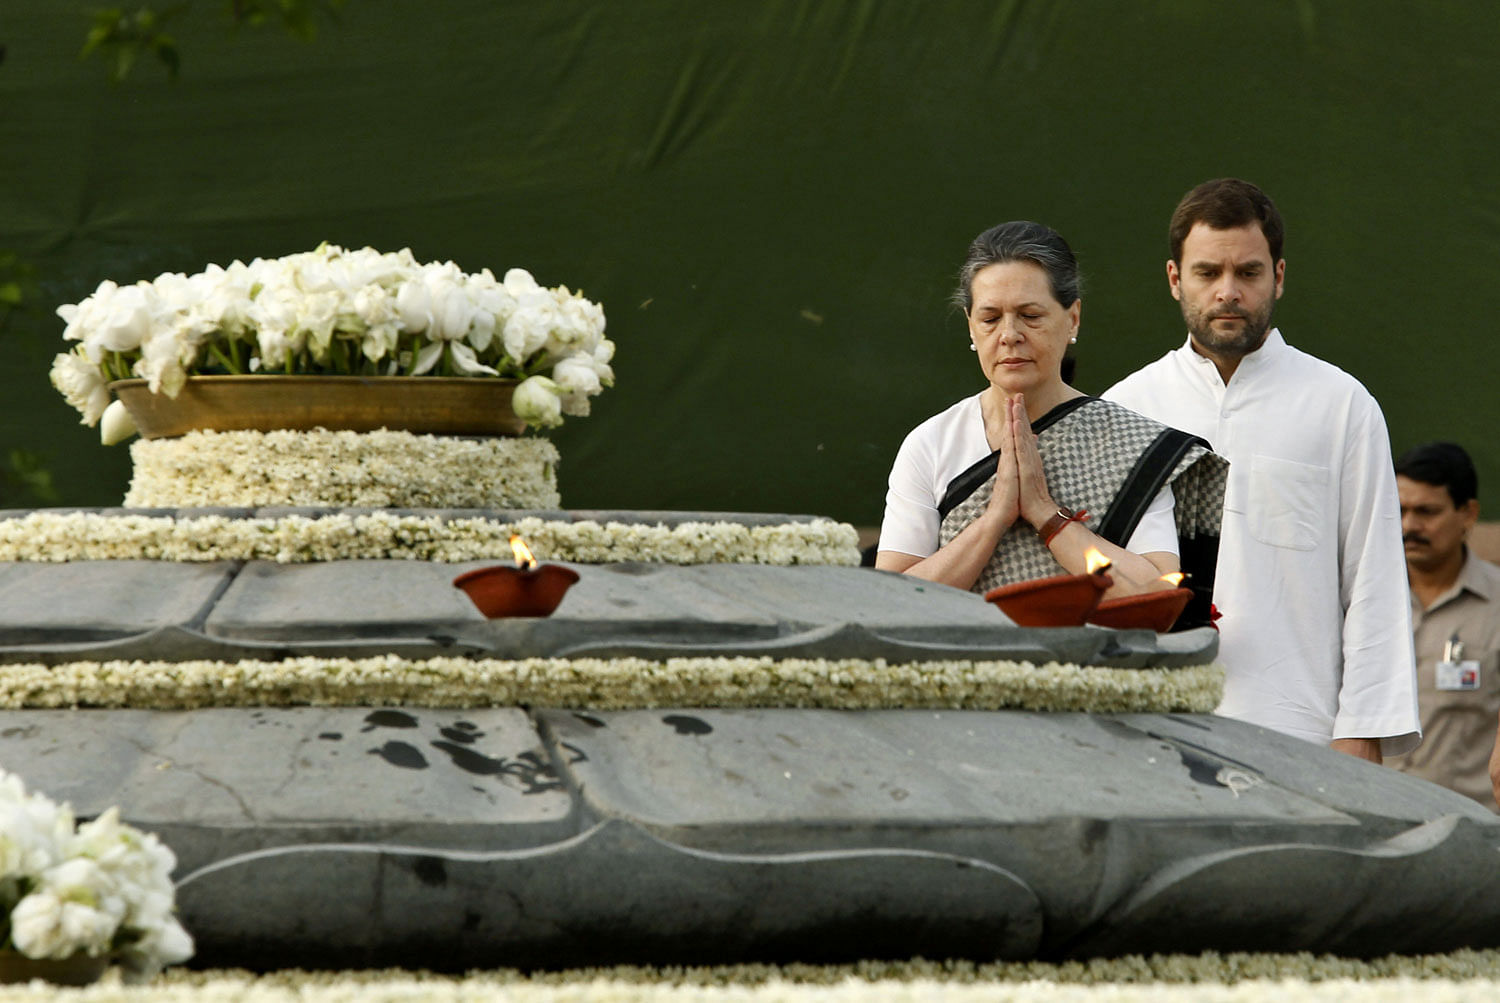 Congress Party President and wife of former Indian Prime Minister Rajiv Gandhi, Sonia Gandhi, right, and her son Rahul Gandhi, pay tribute at Rajiv’s memorial to mark his death anniversary in New Delhi on May 21, 2012. AP